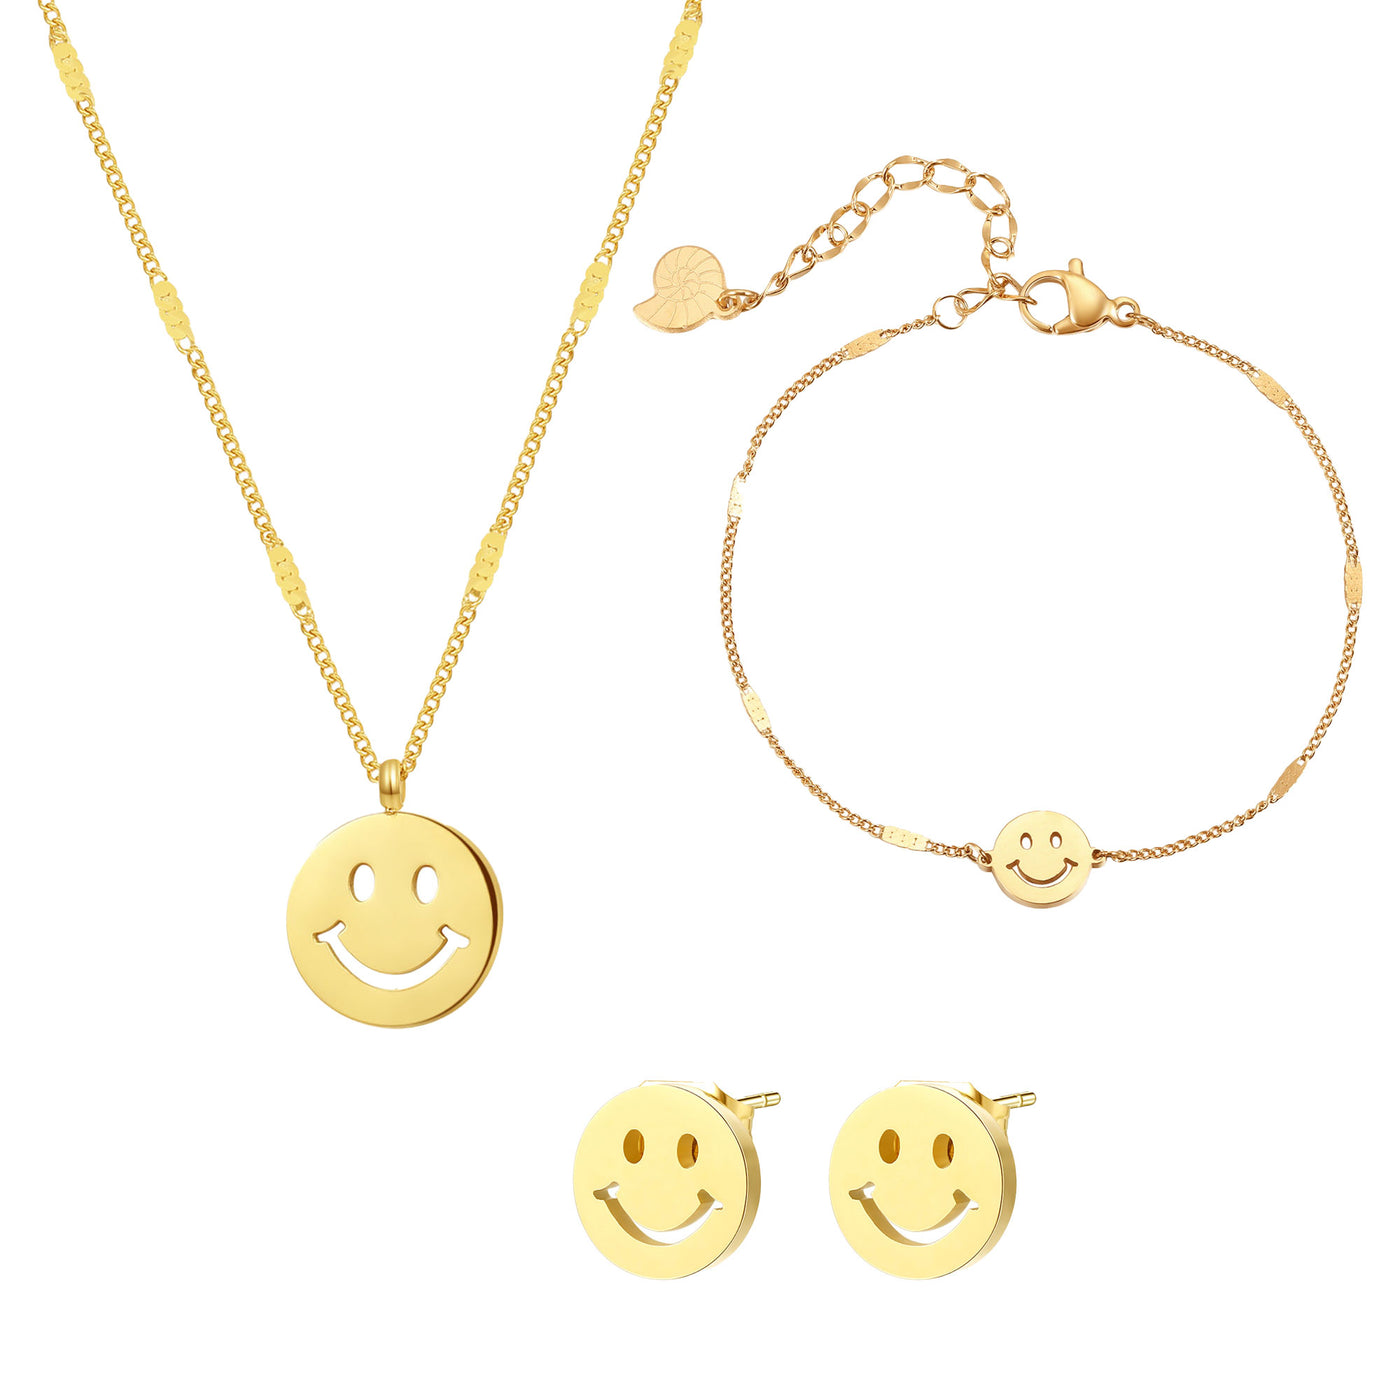 Smiley Set in Gold